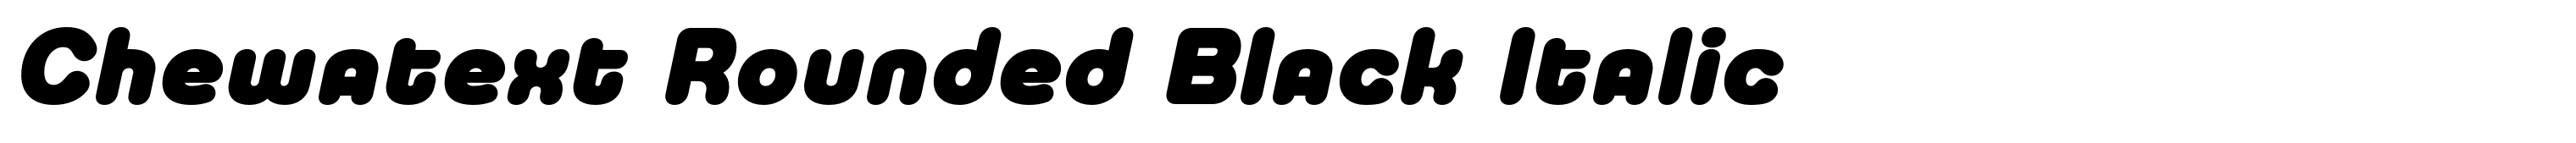 Chewatext Rounded Black Italic